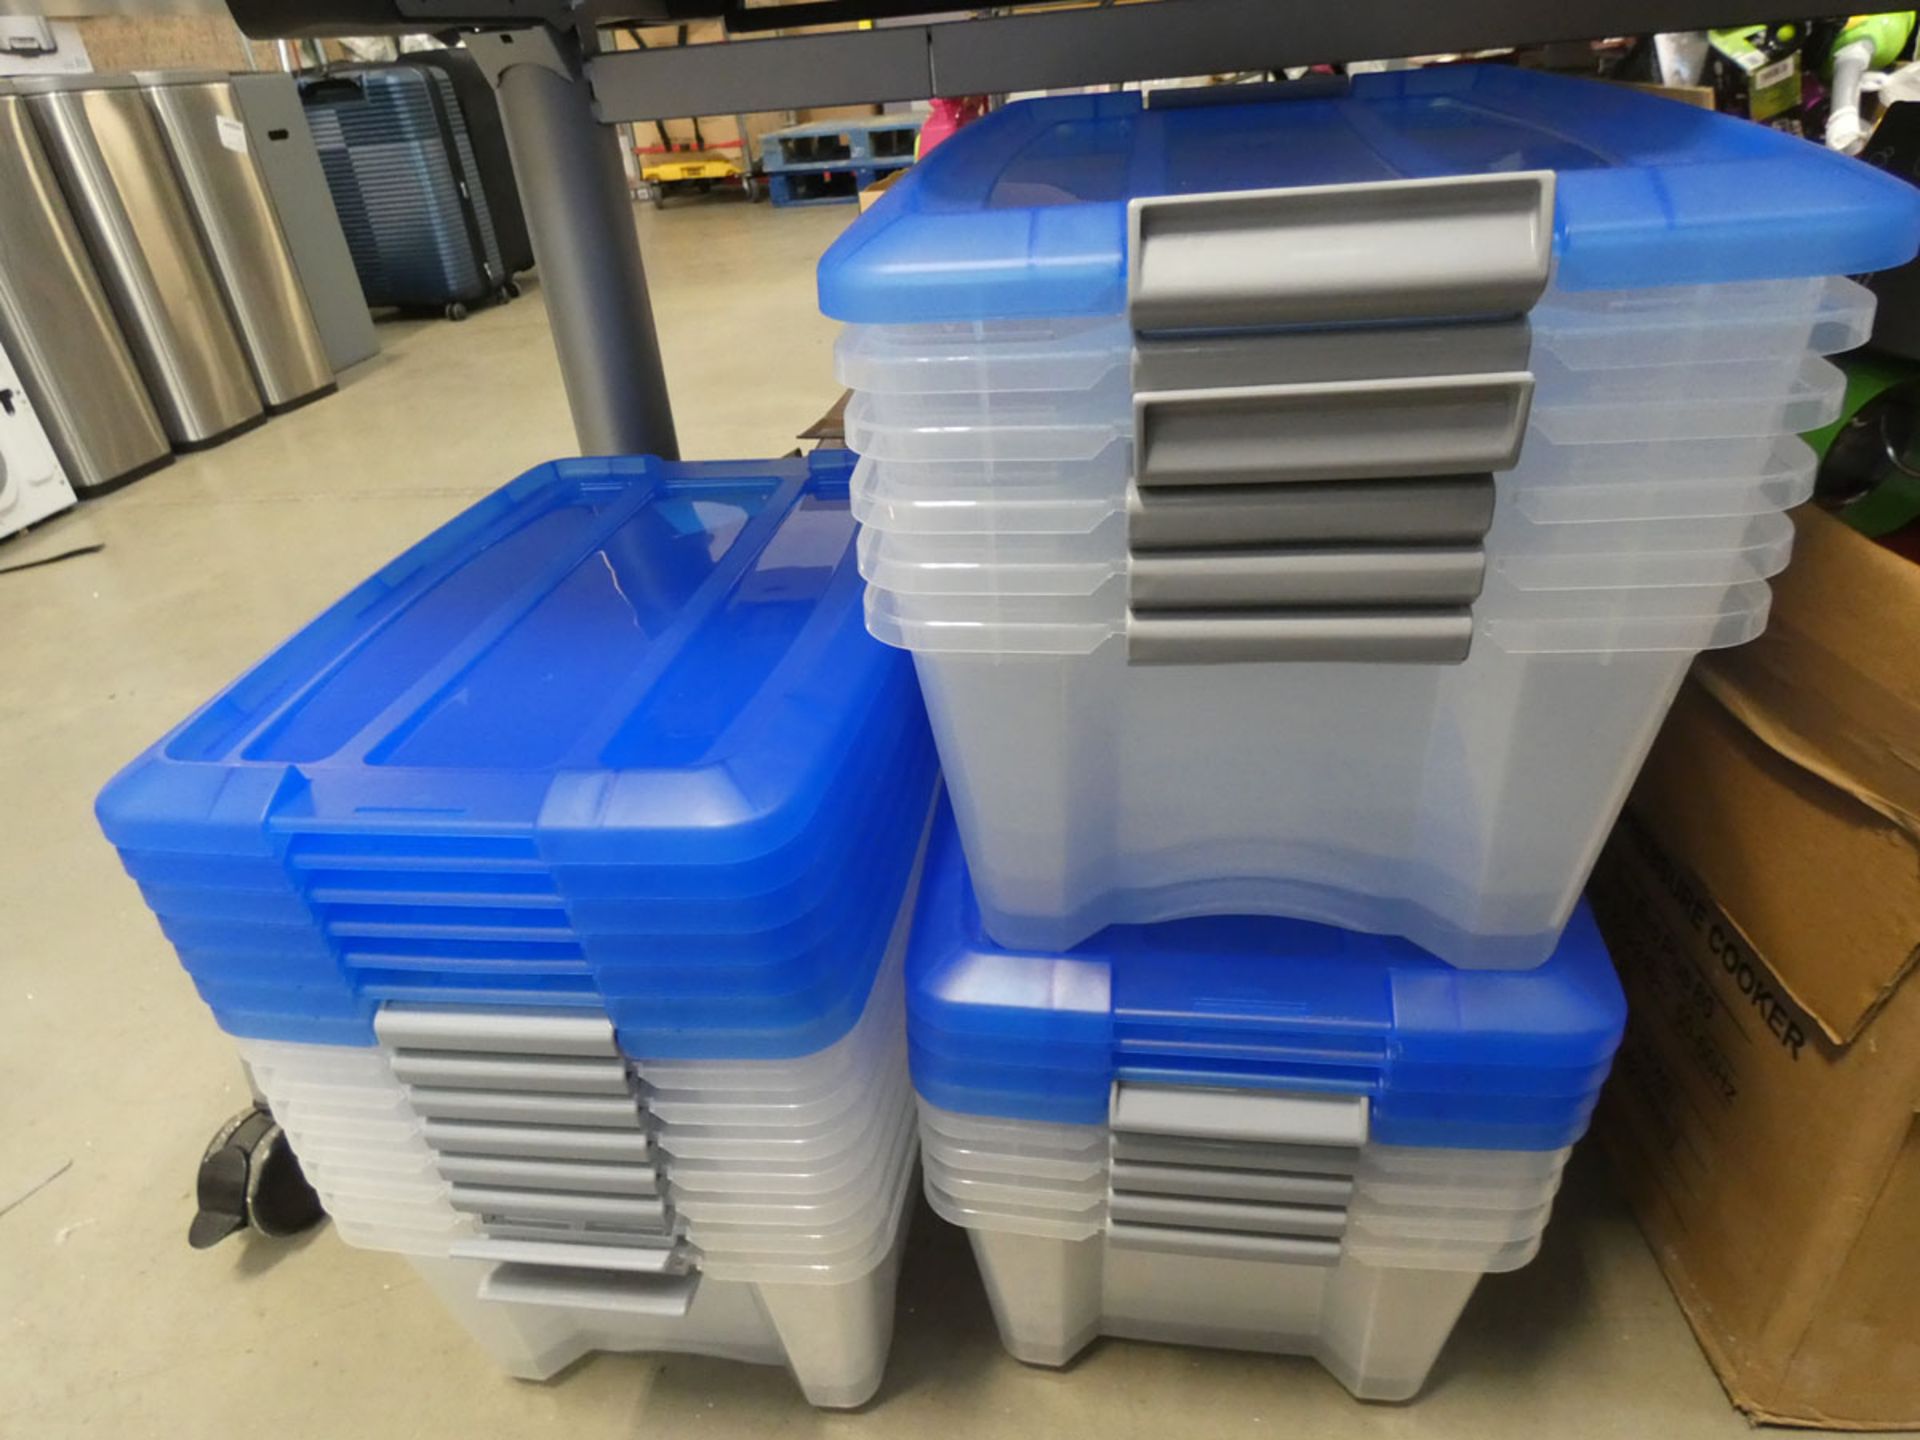 3 stacks of small storage boxes